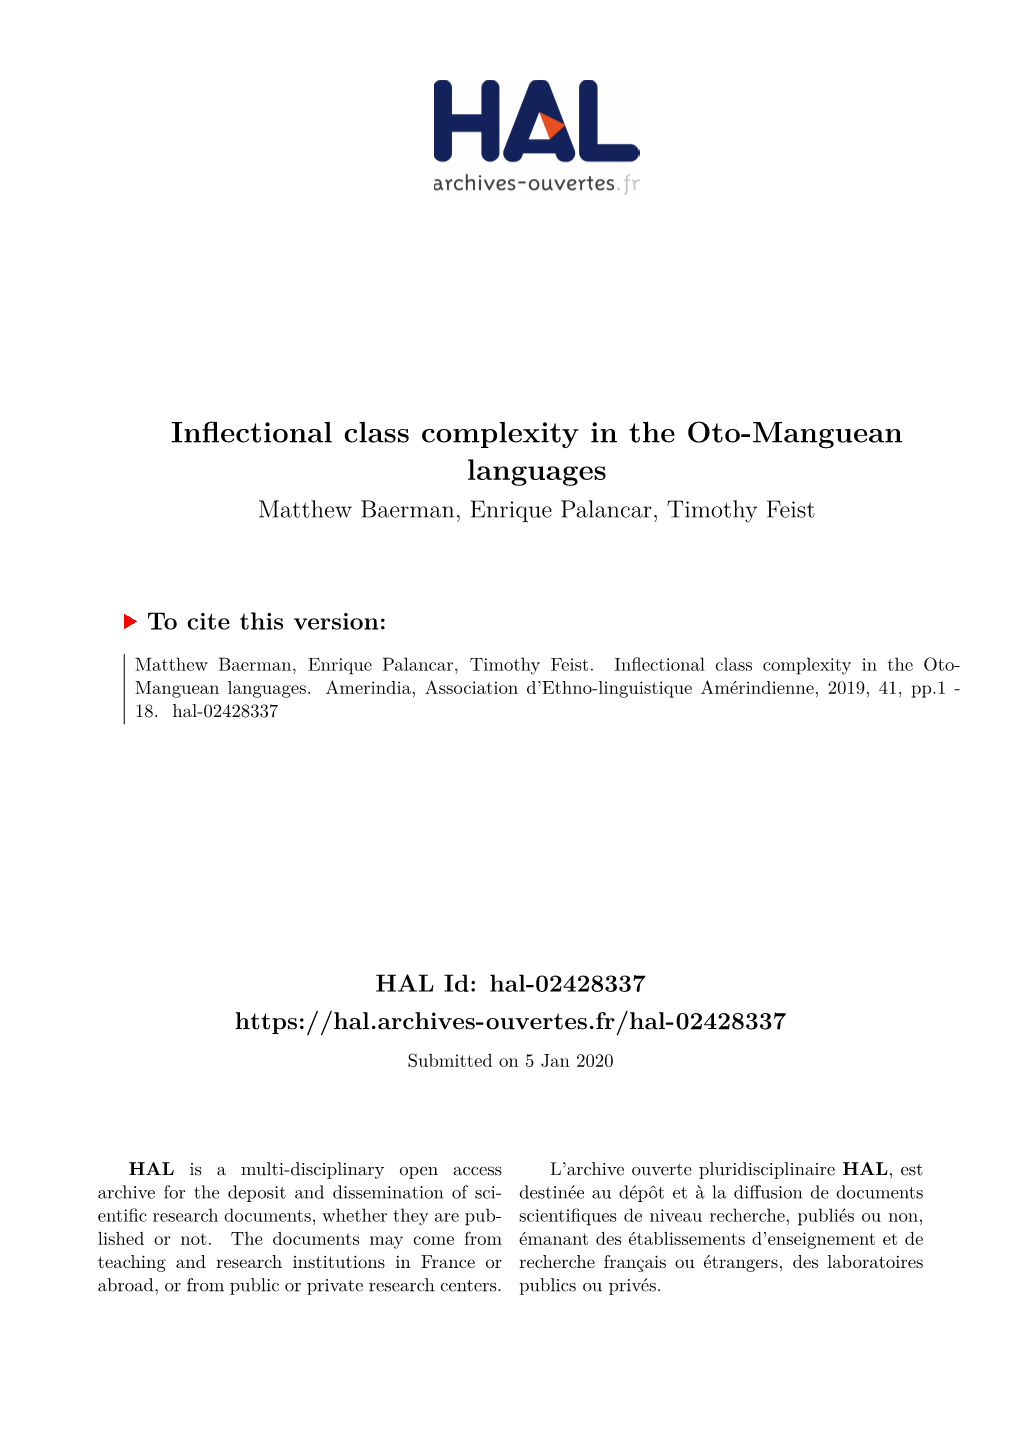 Inflectional Class Complexity in the Oto-Manguean Languages Matthew Baerman, Enrique Palancar, Timothy Feist